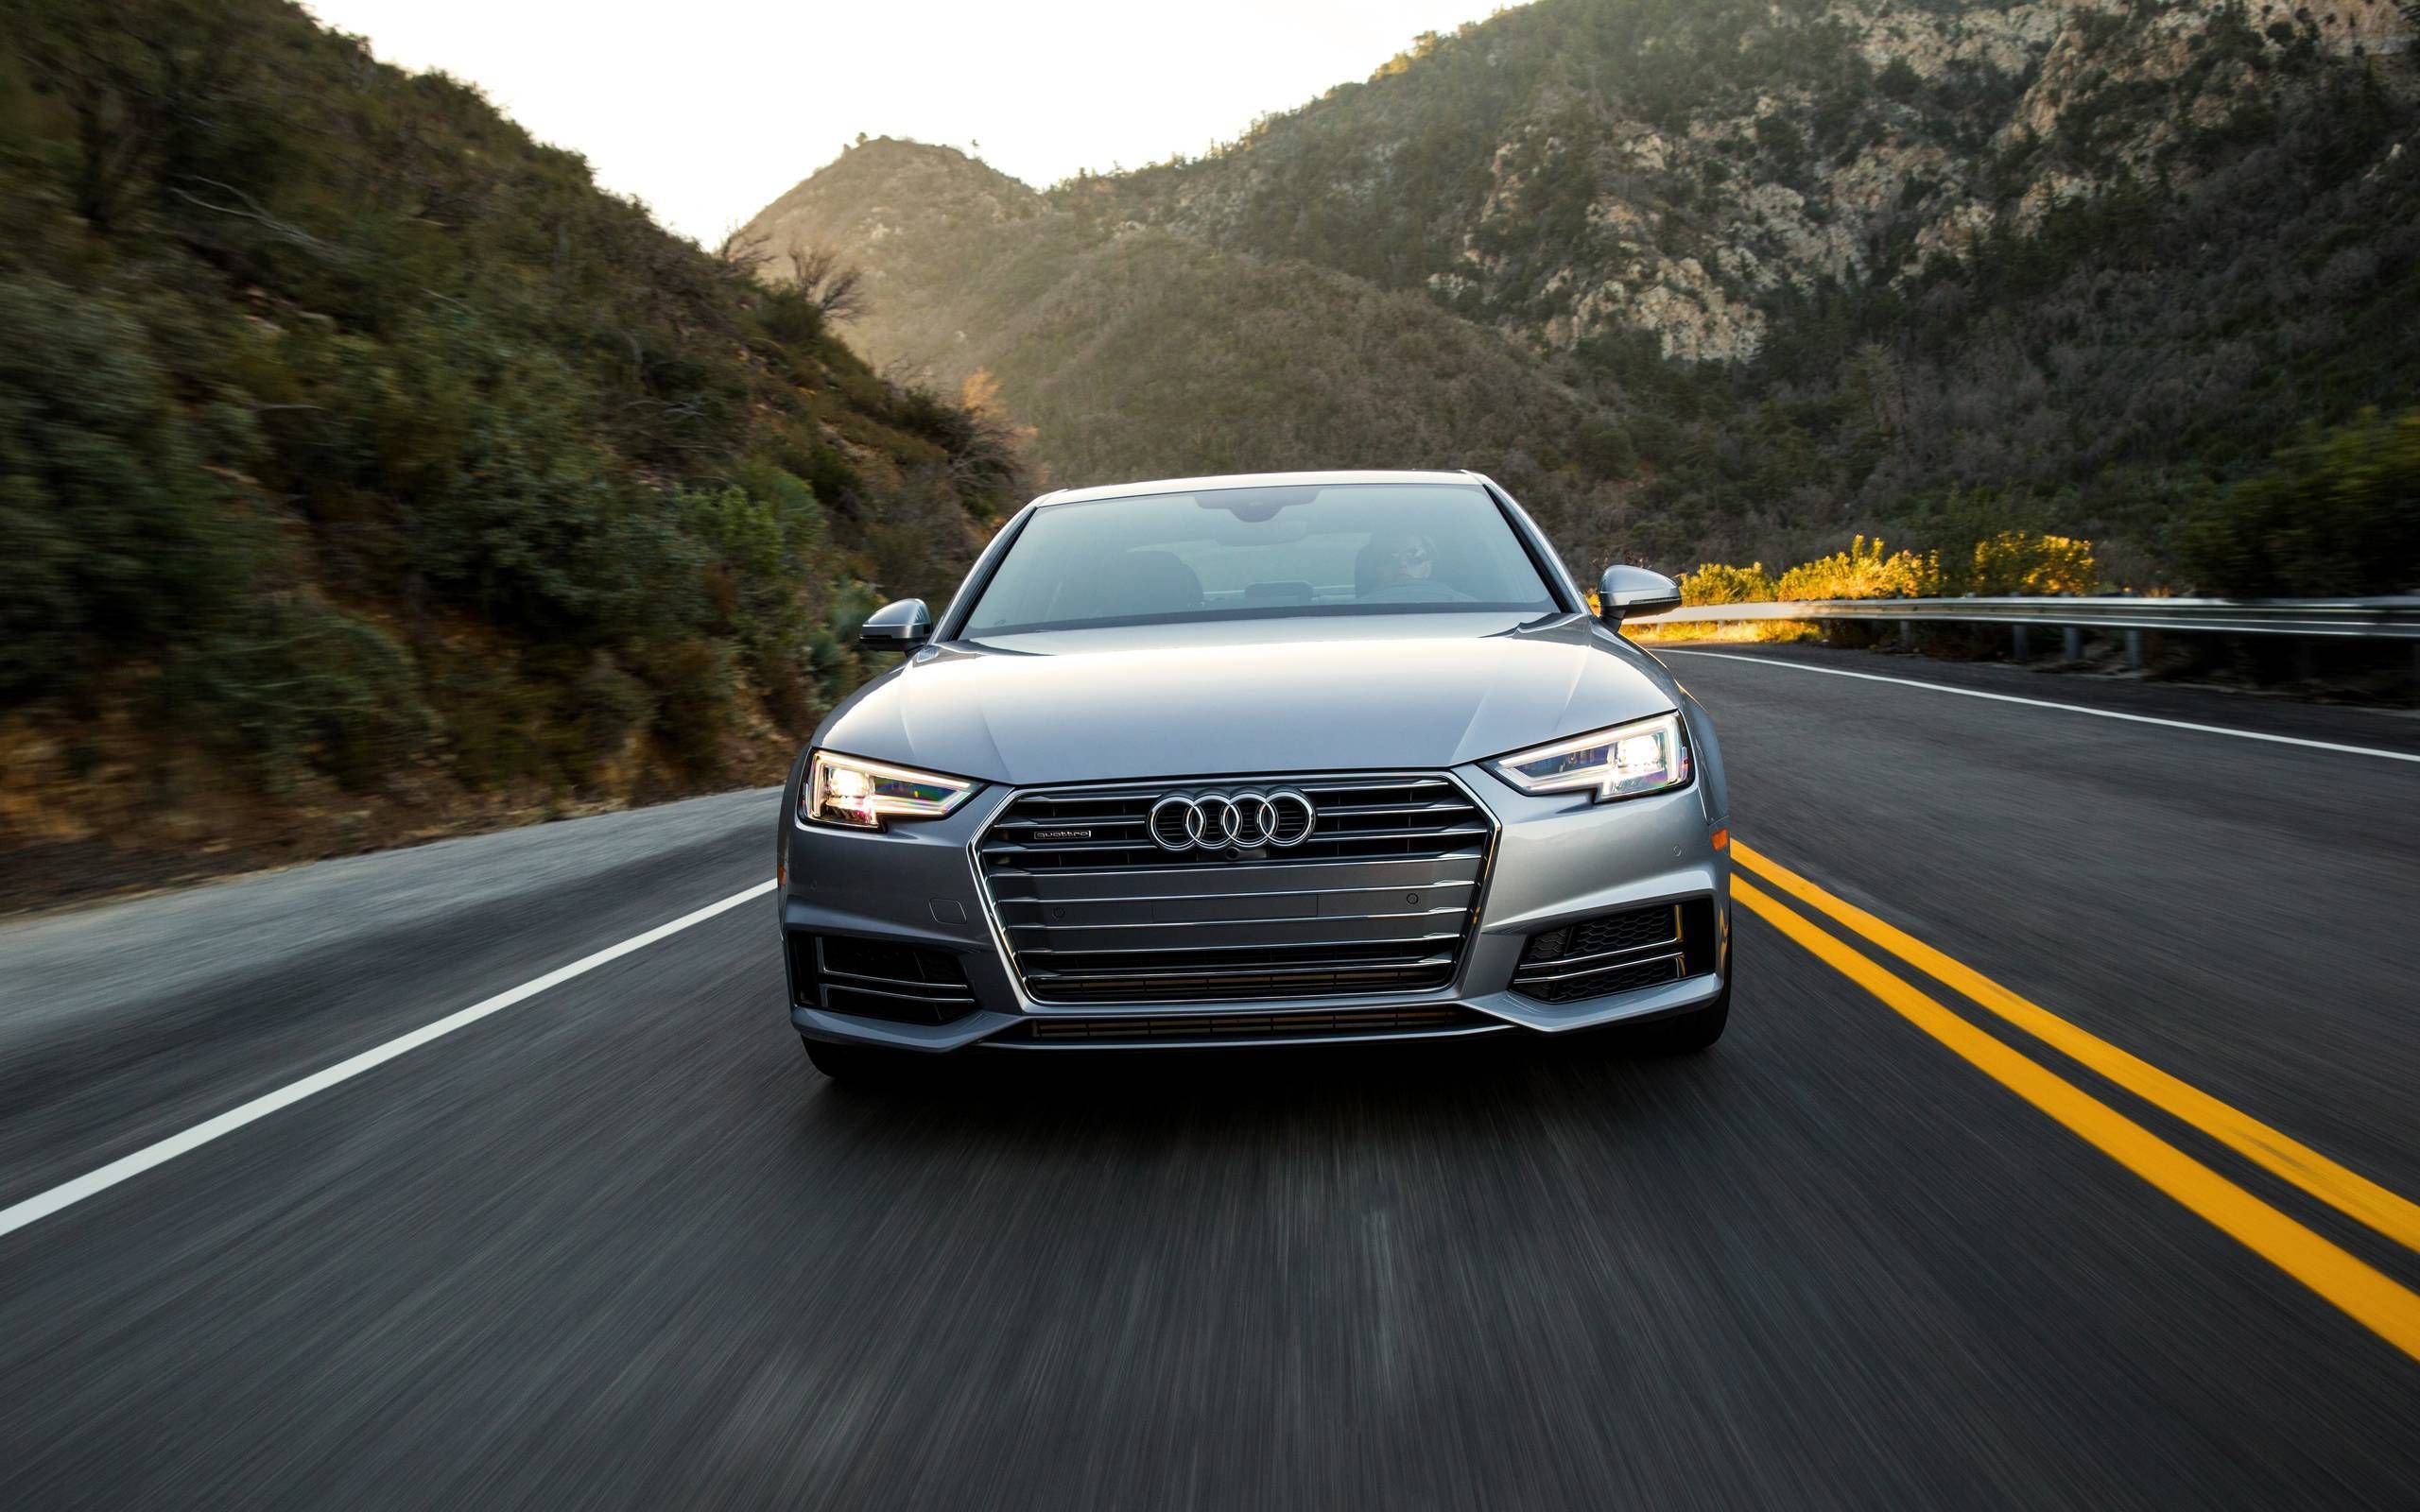 2017 Audi A4 review: Nerd is the new black